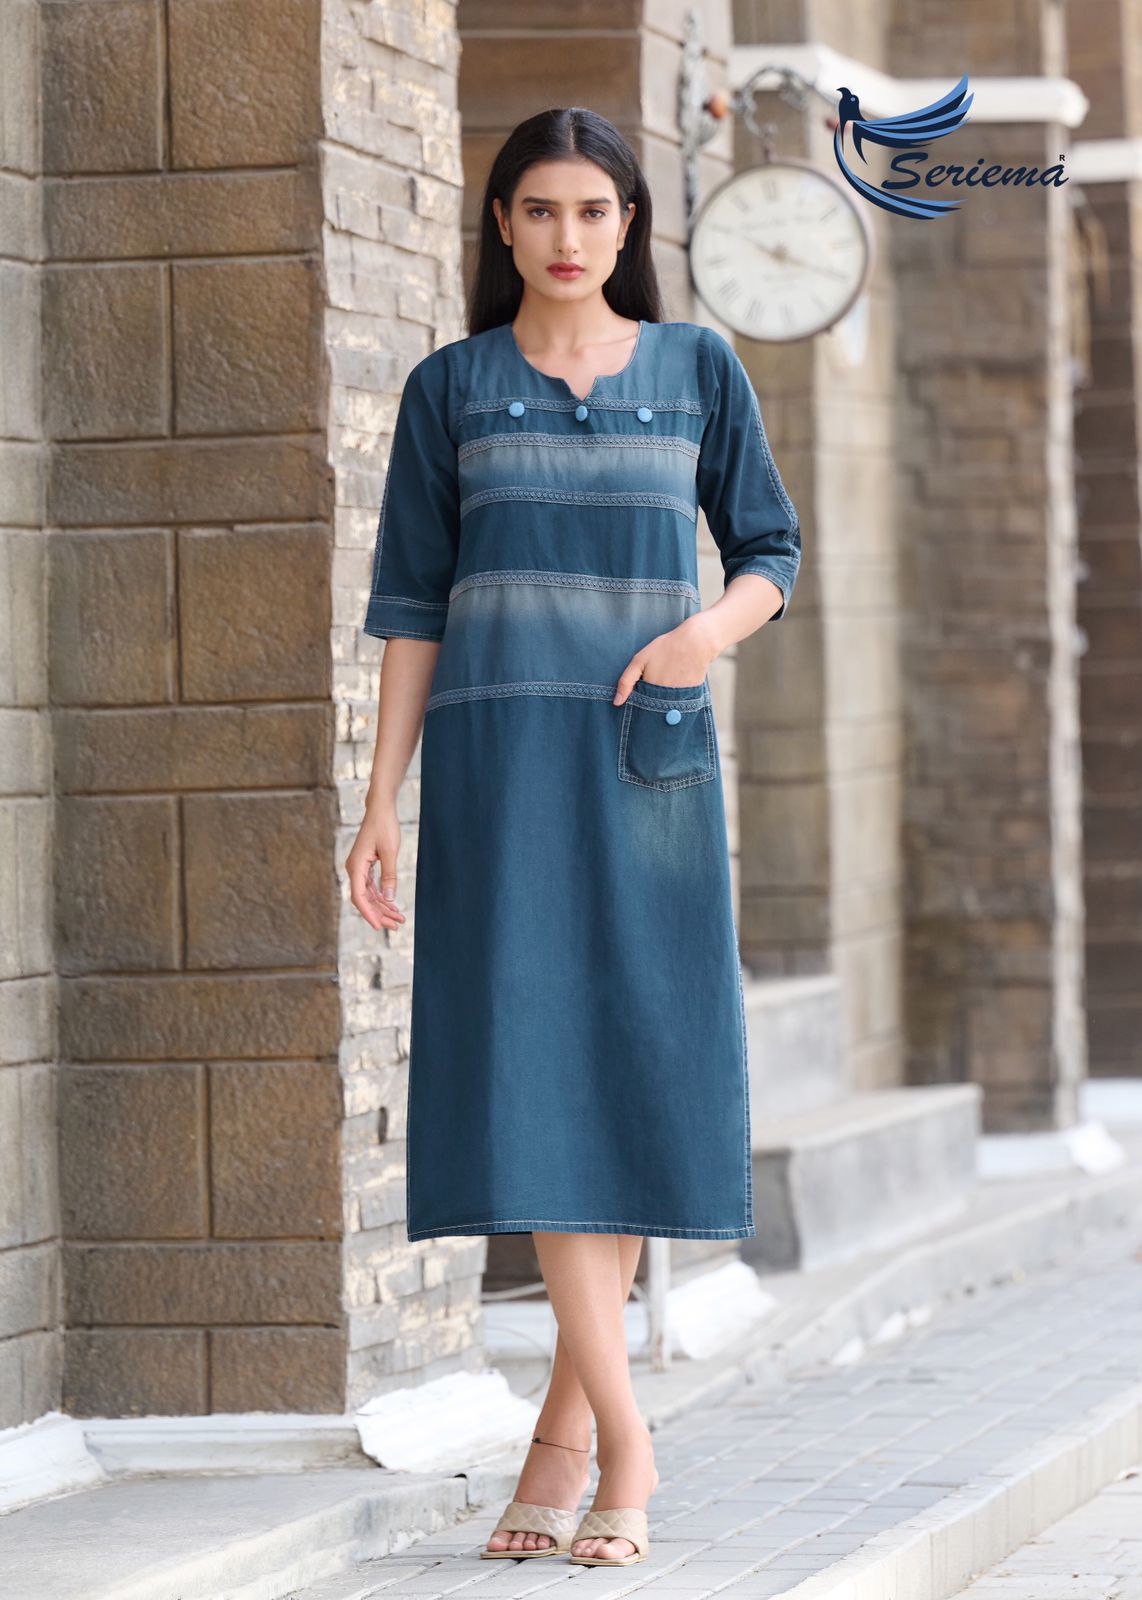 Jeans with Kurti Archives - Grihshobha